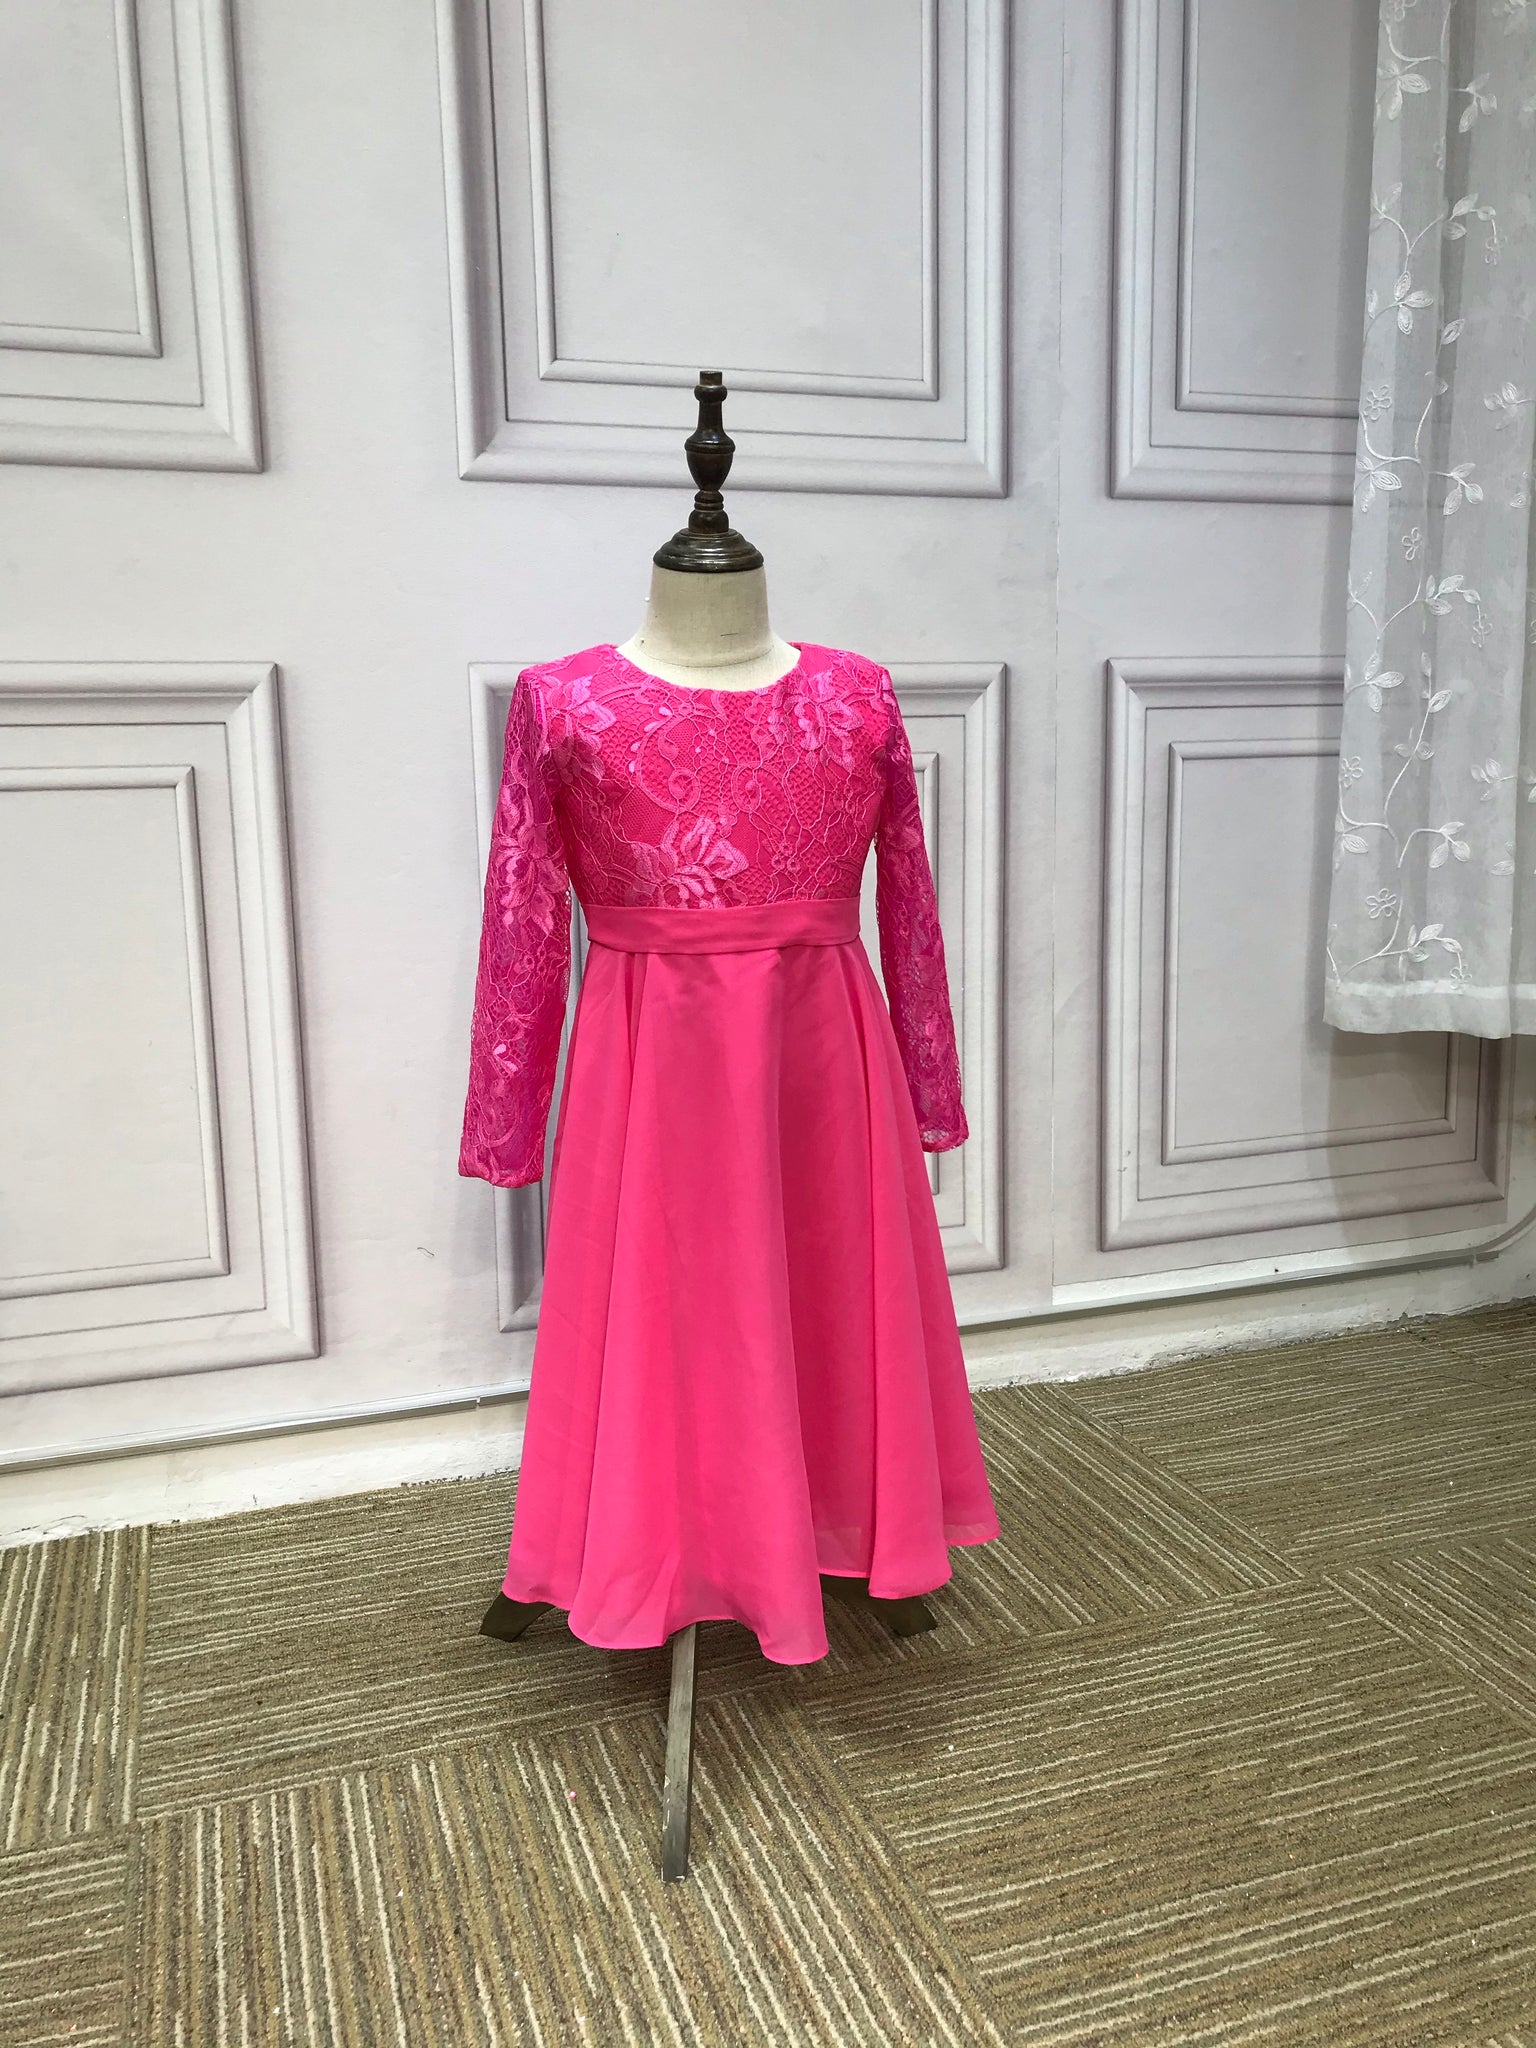 Temperley London Pink Lace Dress - Style Charade